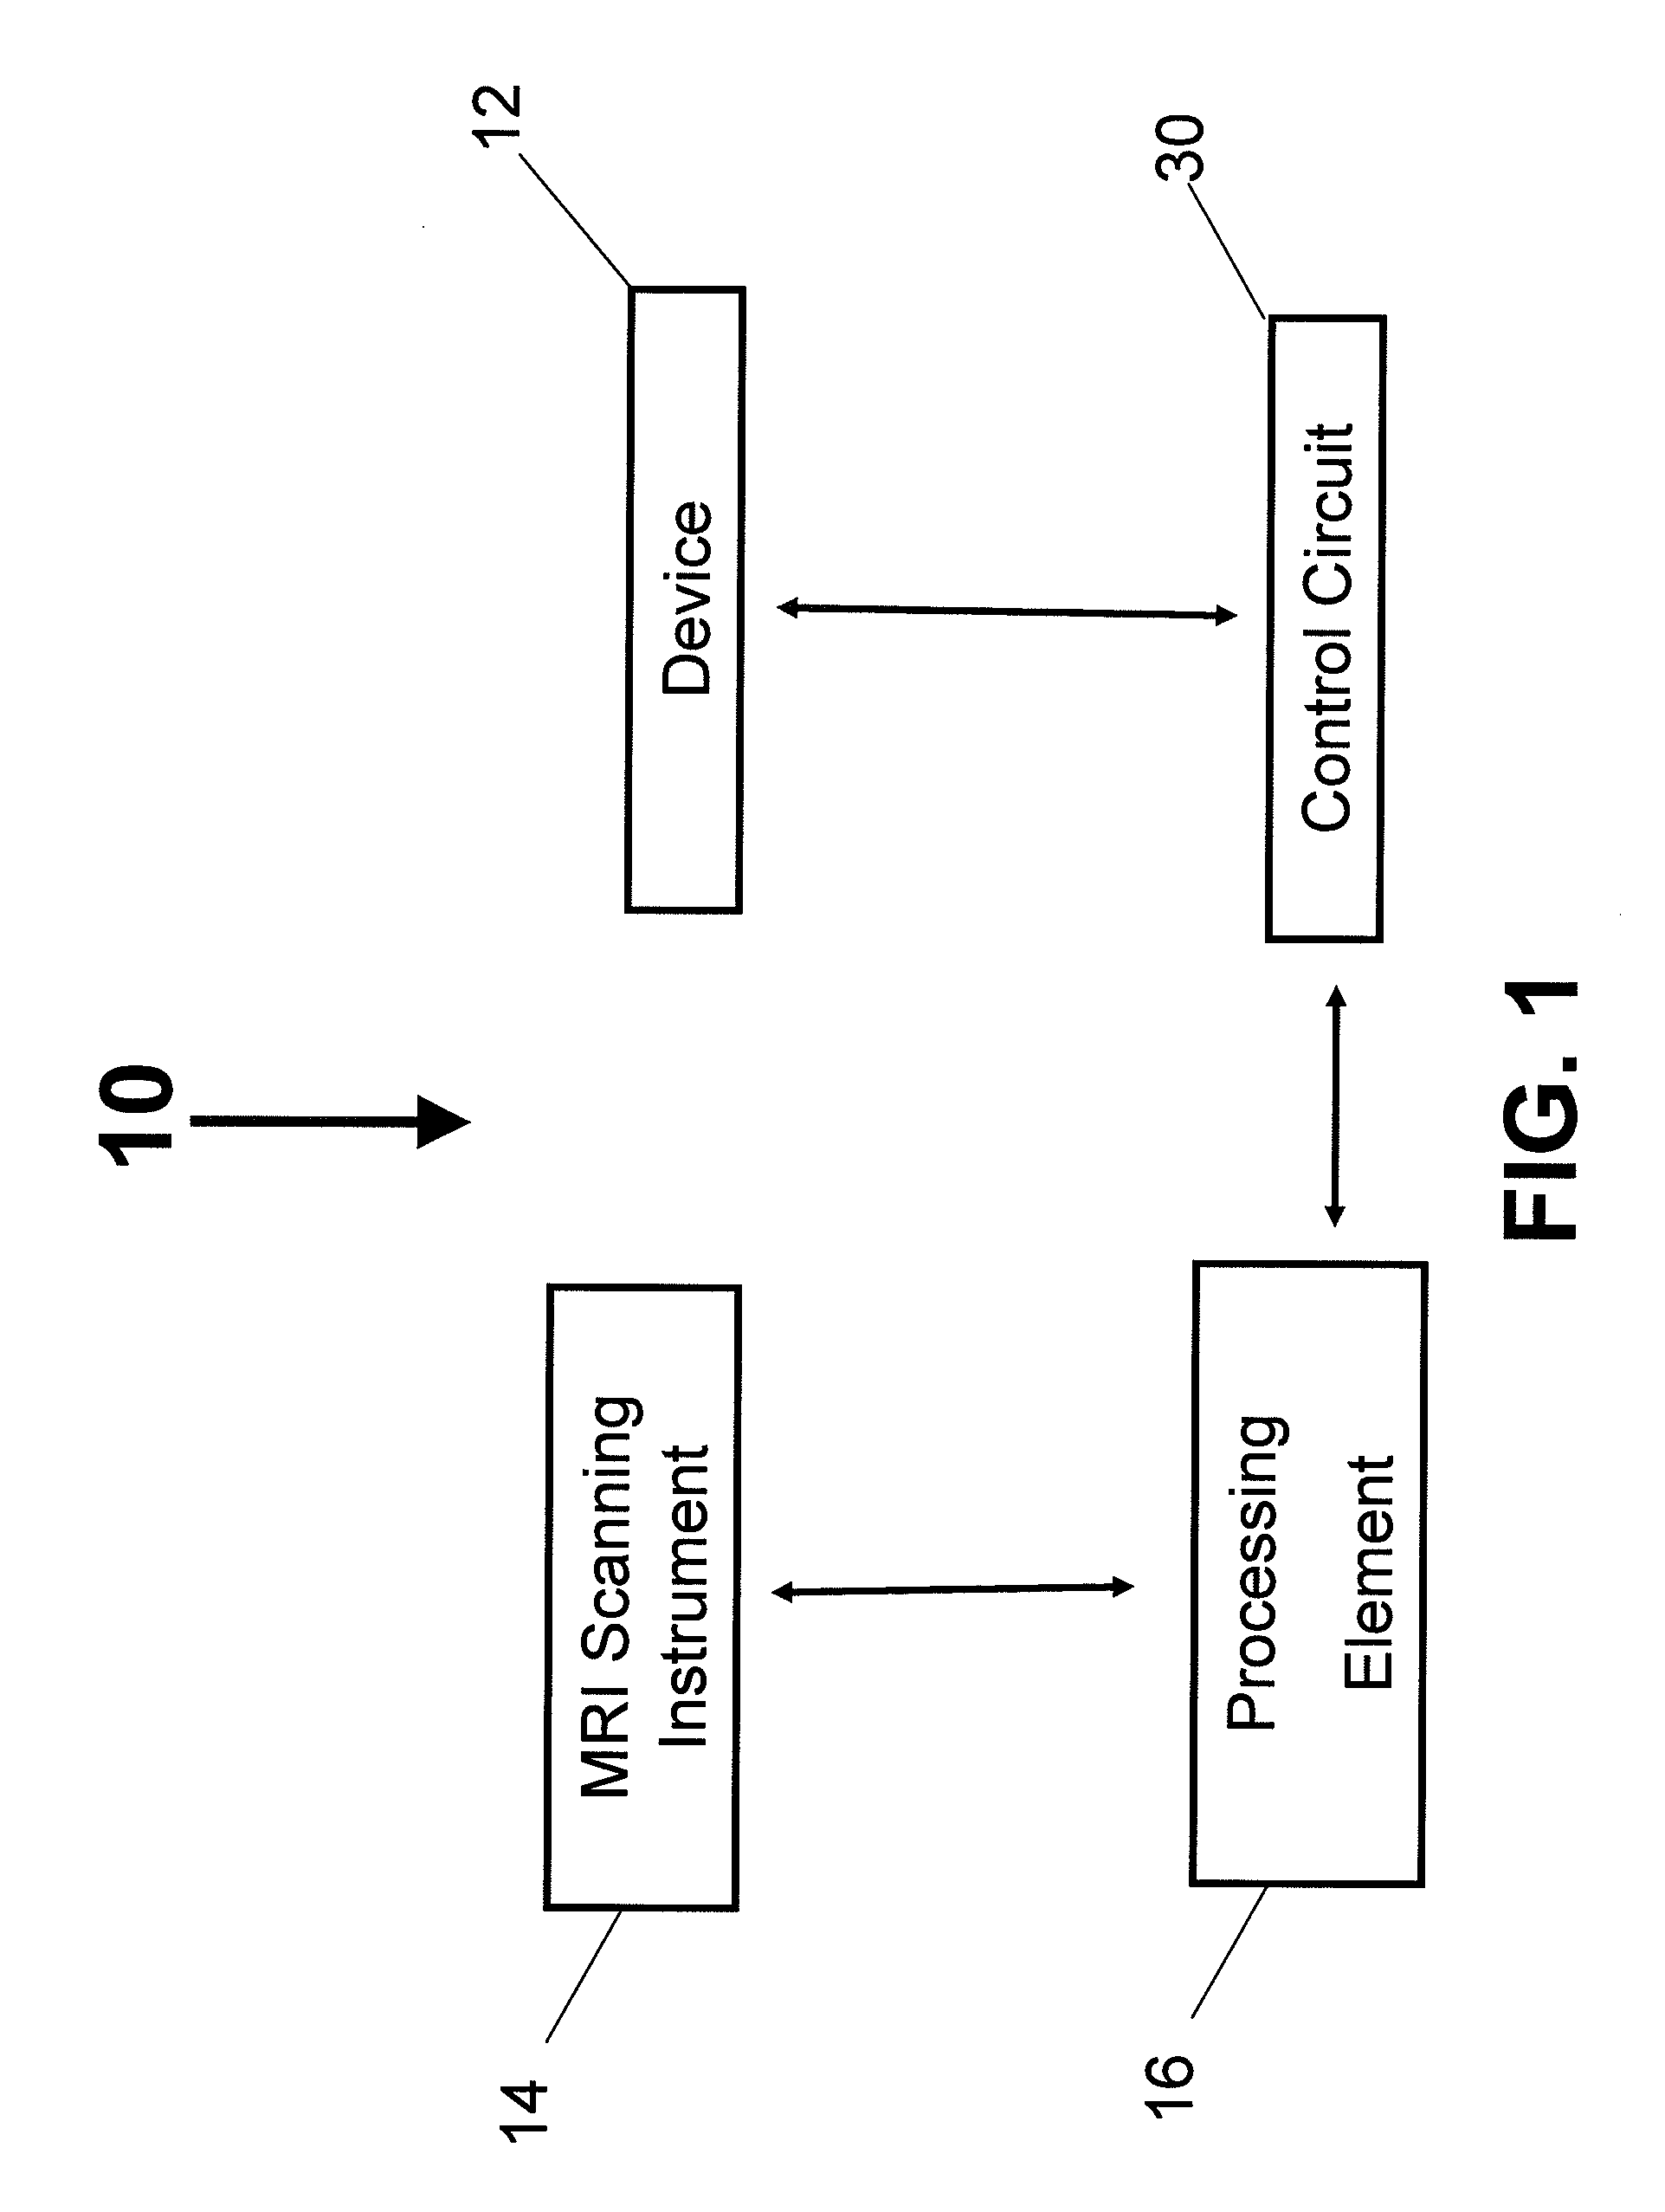 Systems and methods for calibrating functional magnetic resonance imaging of living tissue